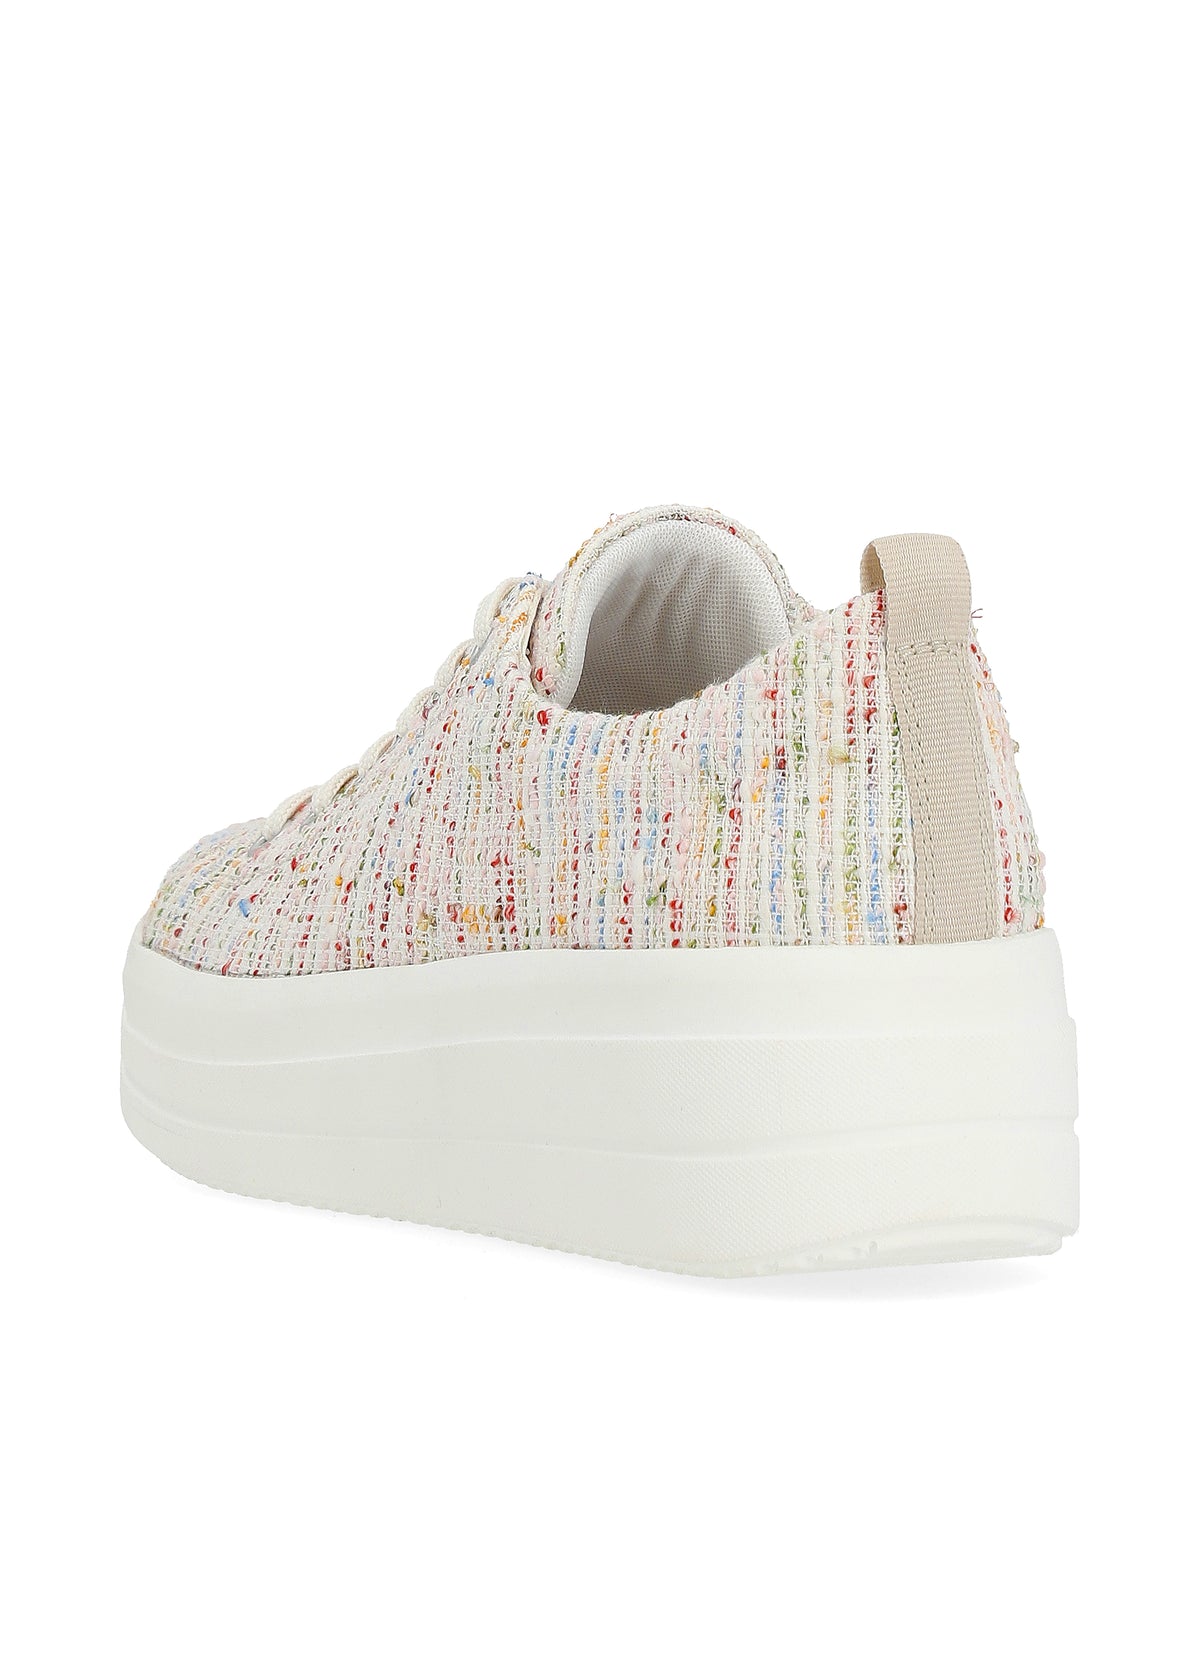 Sneakers with a thick sole - light-colored fabric surface